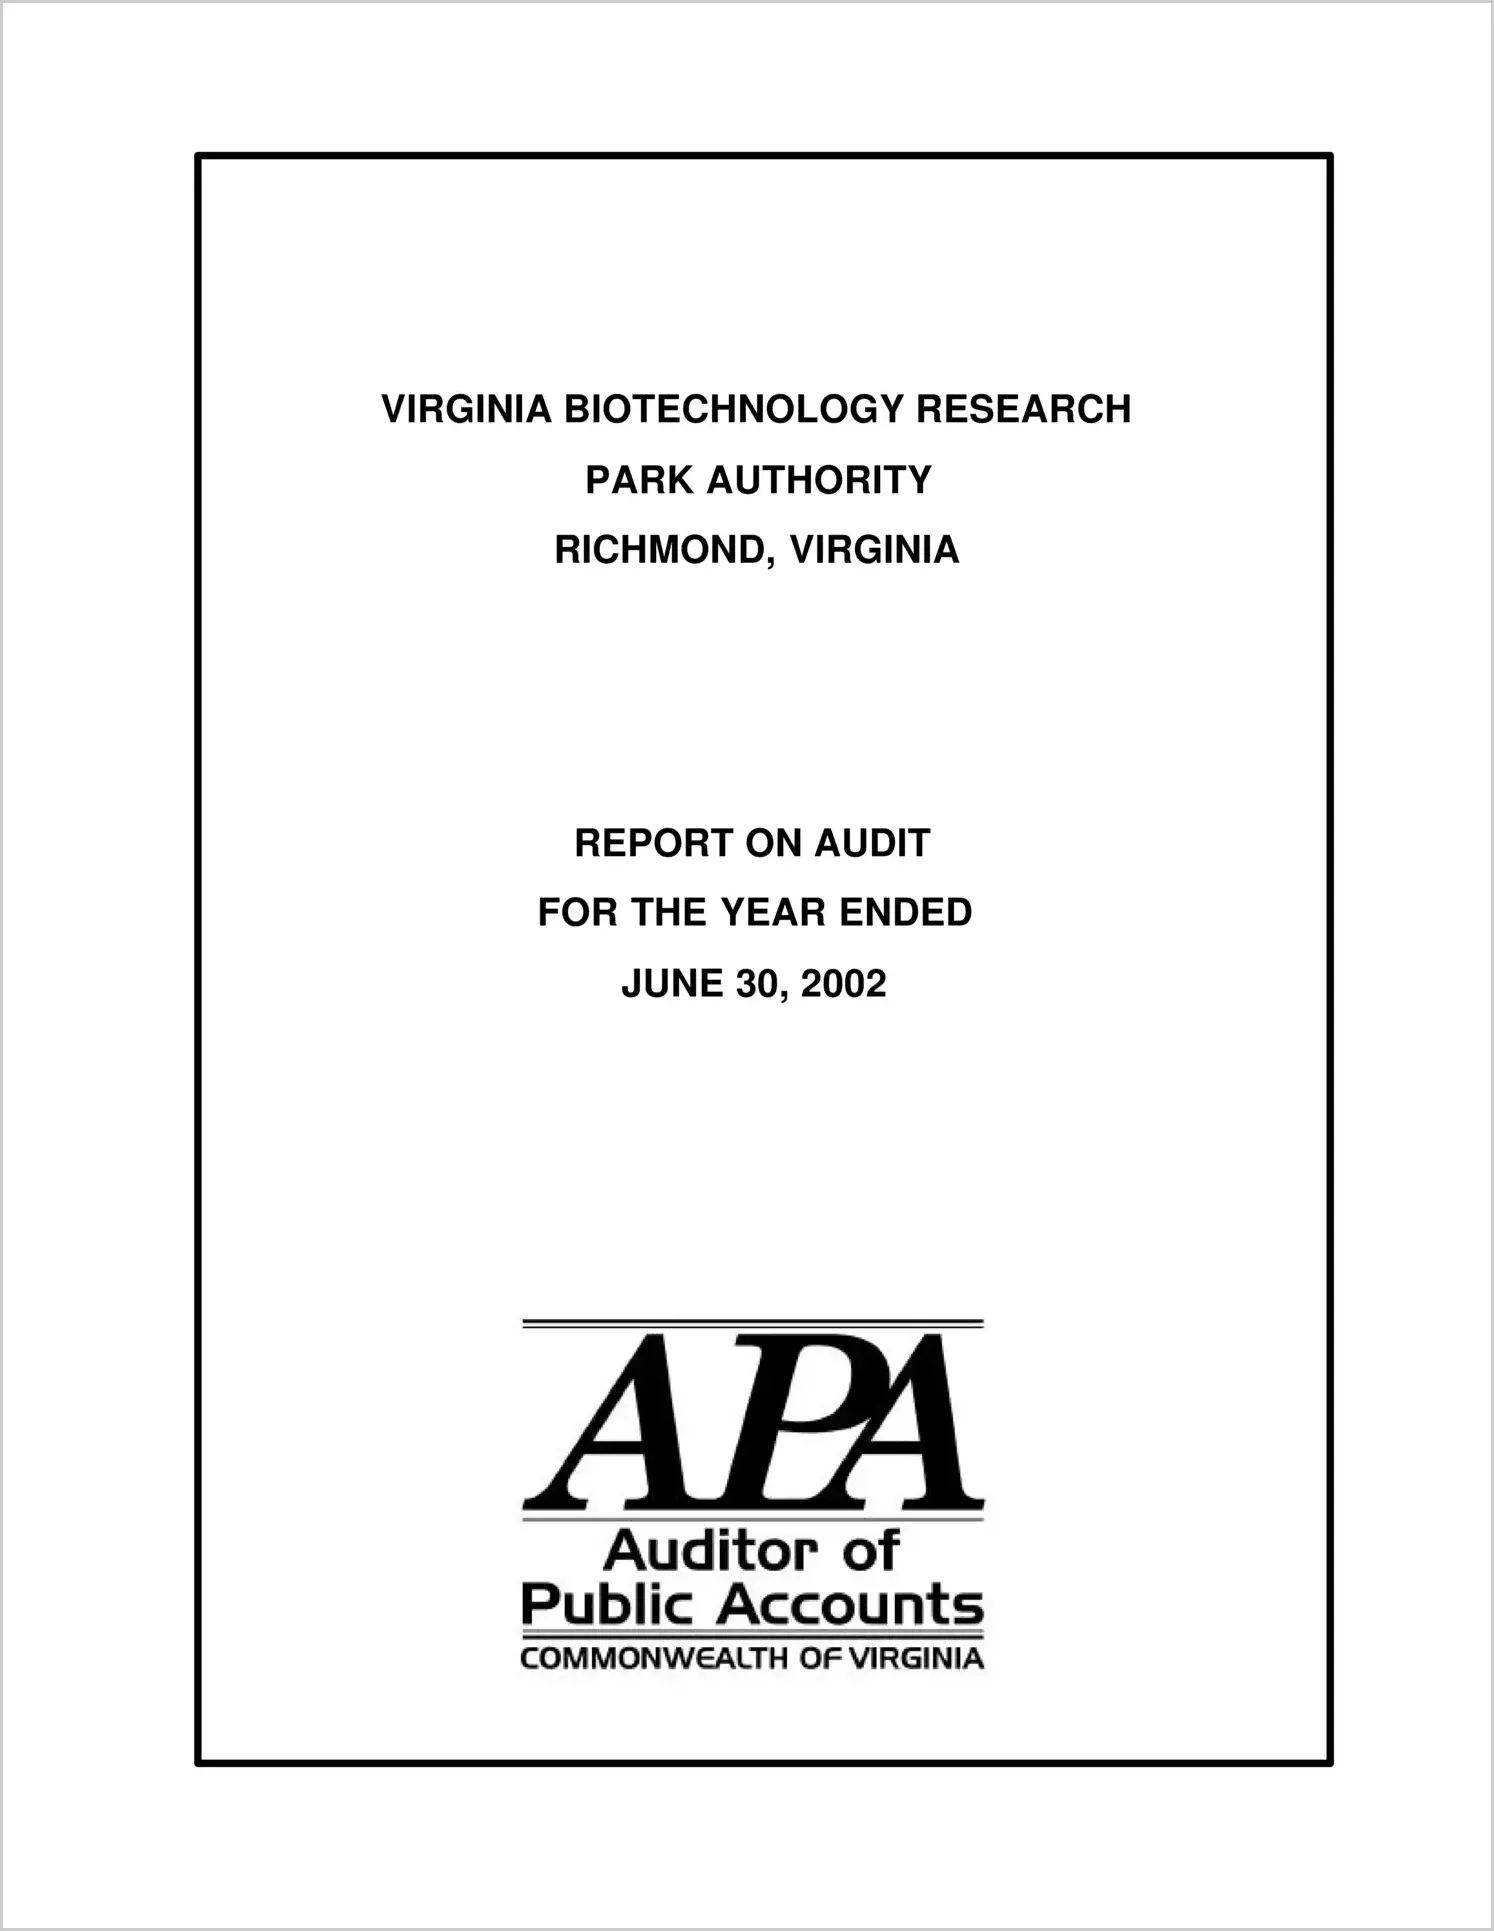 Virginia Biotechnology Research Park Authority for the year ended June 30, 2002